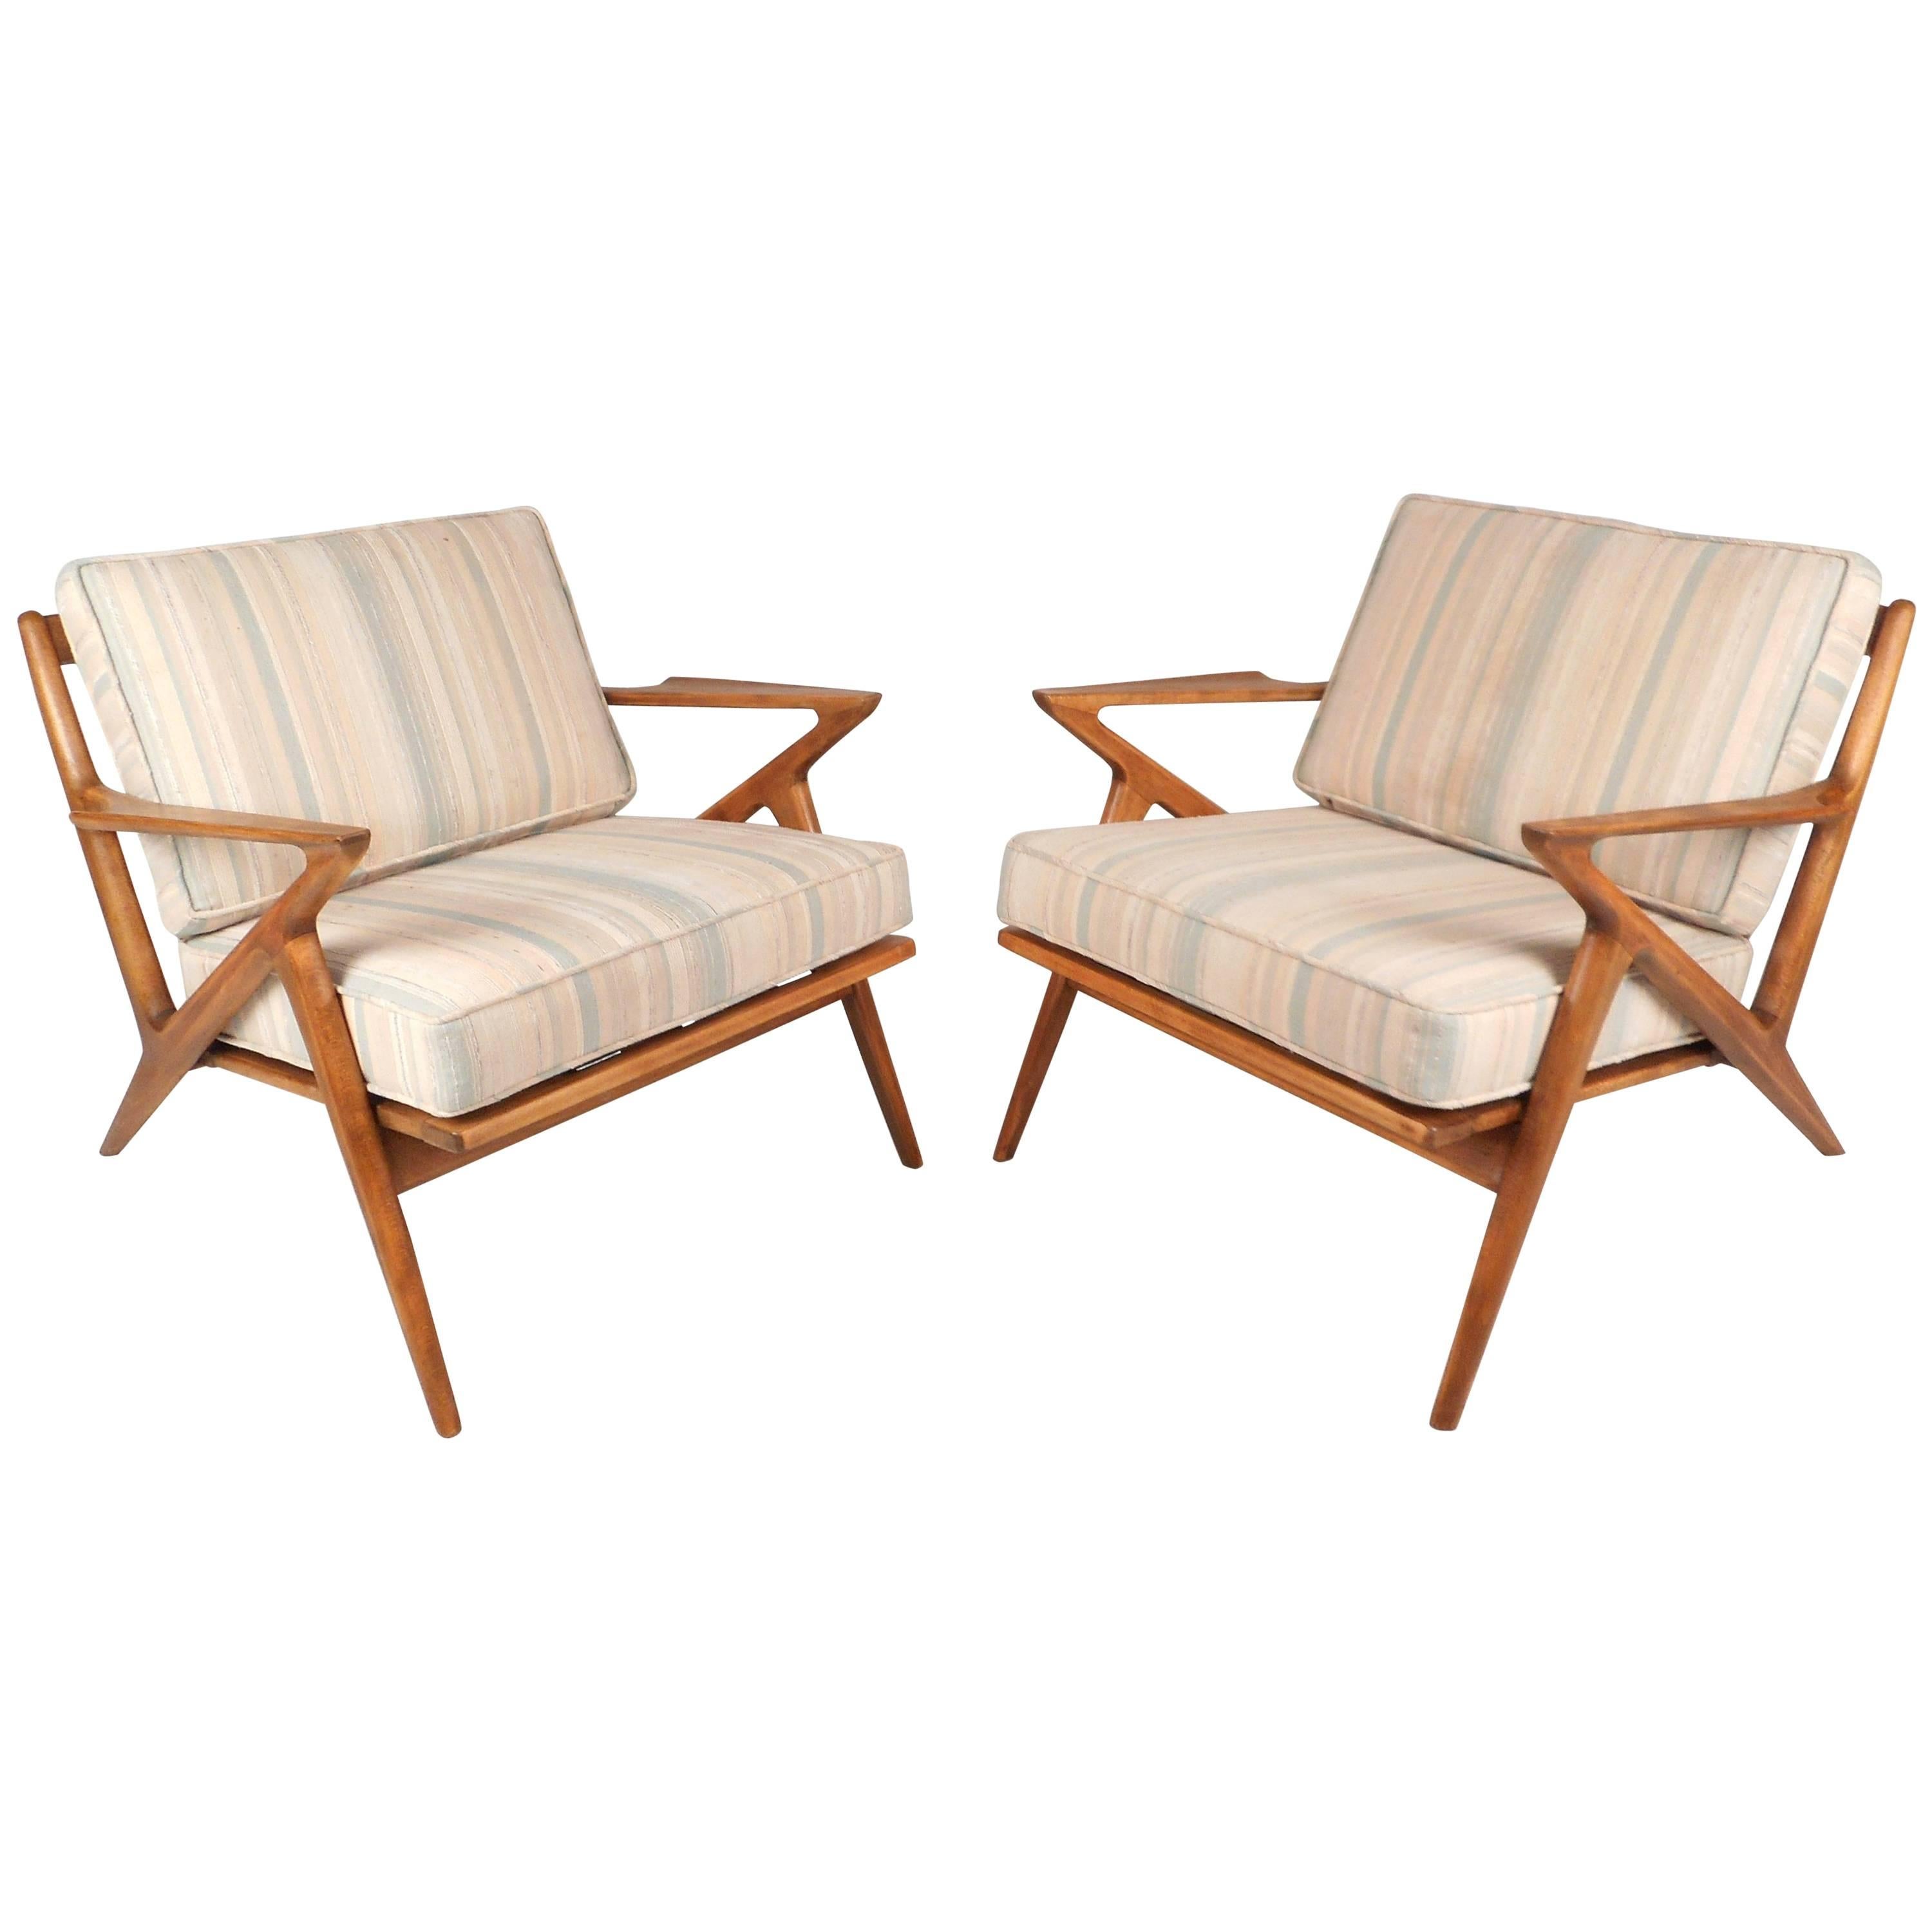 Mid-Century Modern Poul Jensen for Selig "Z" Lounge Chairs